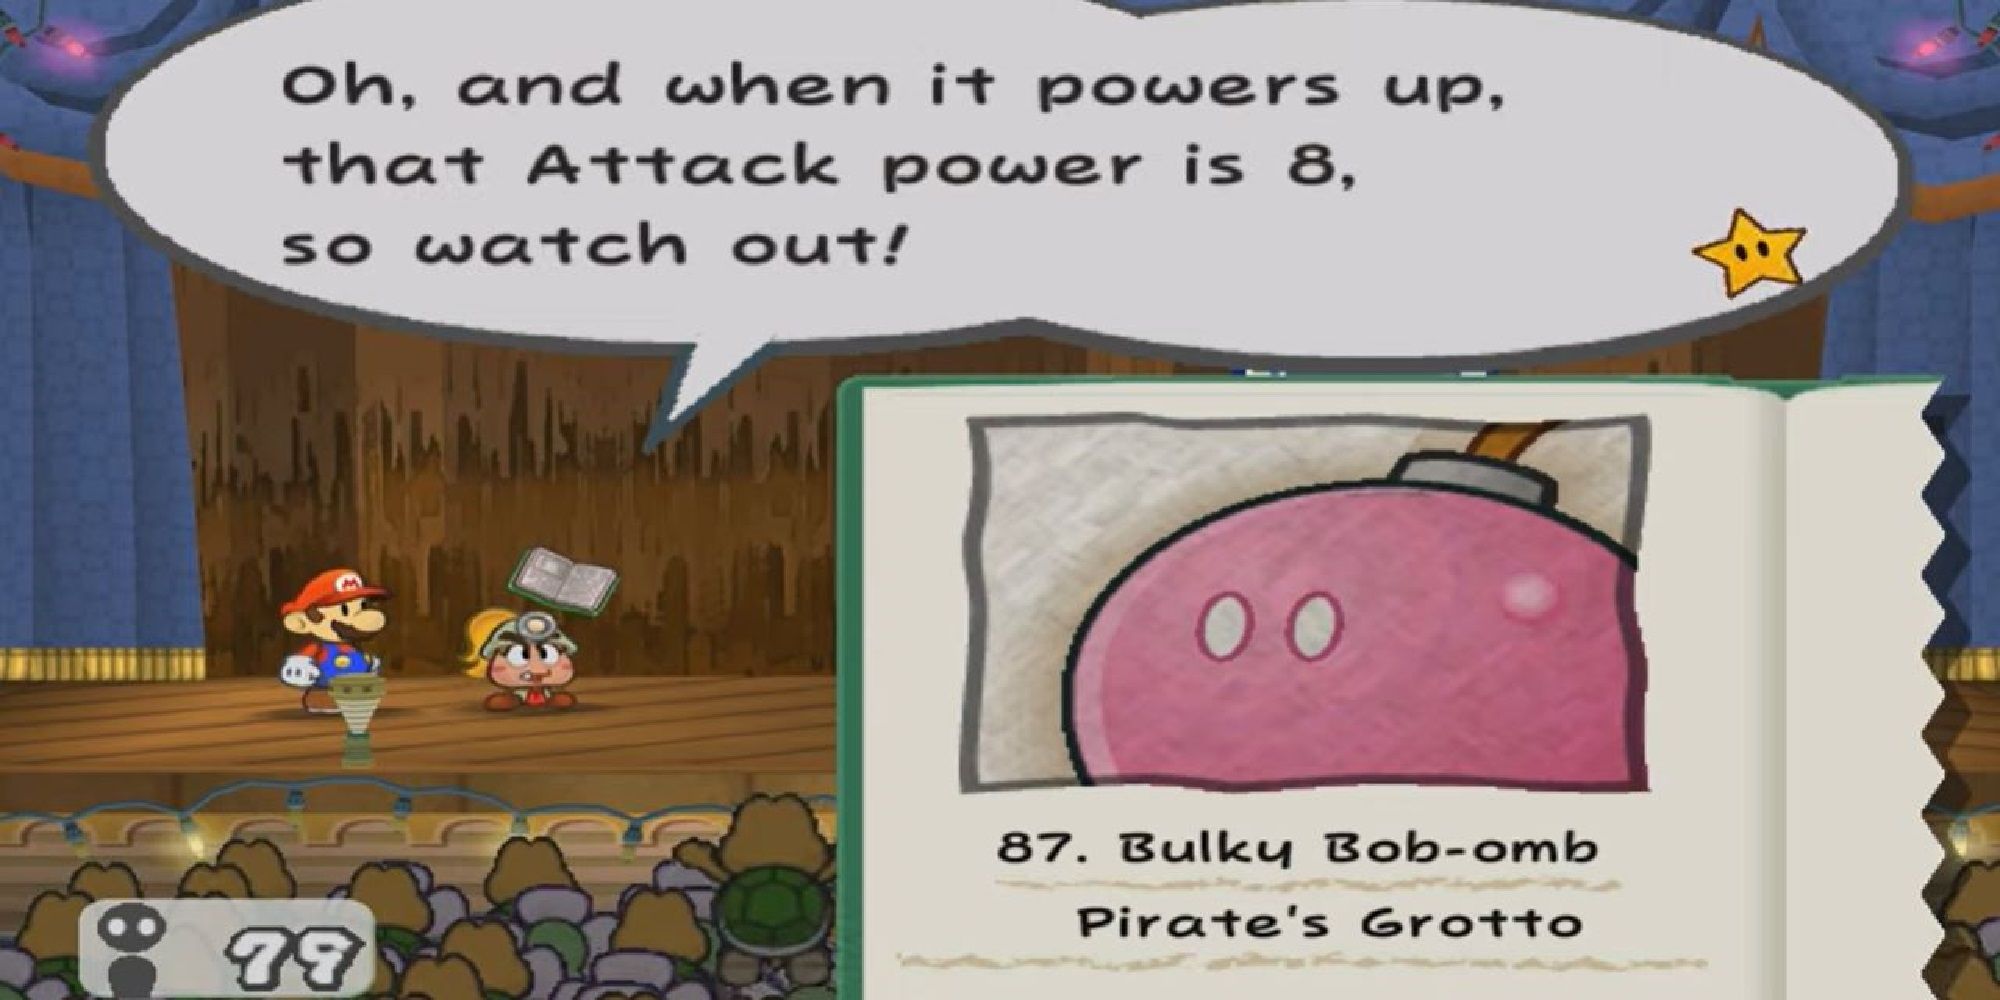 Goombella warns about a large pink Bob-omb's strength in a battle